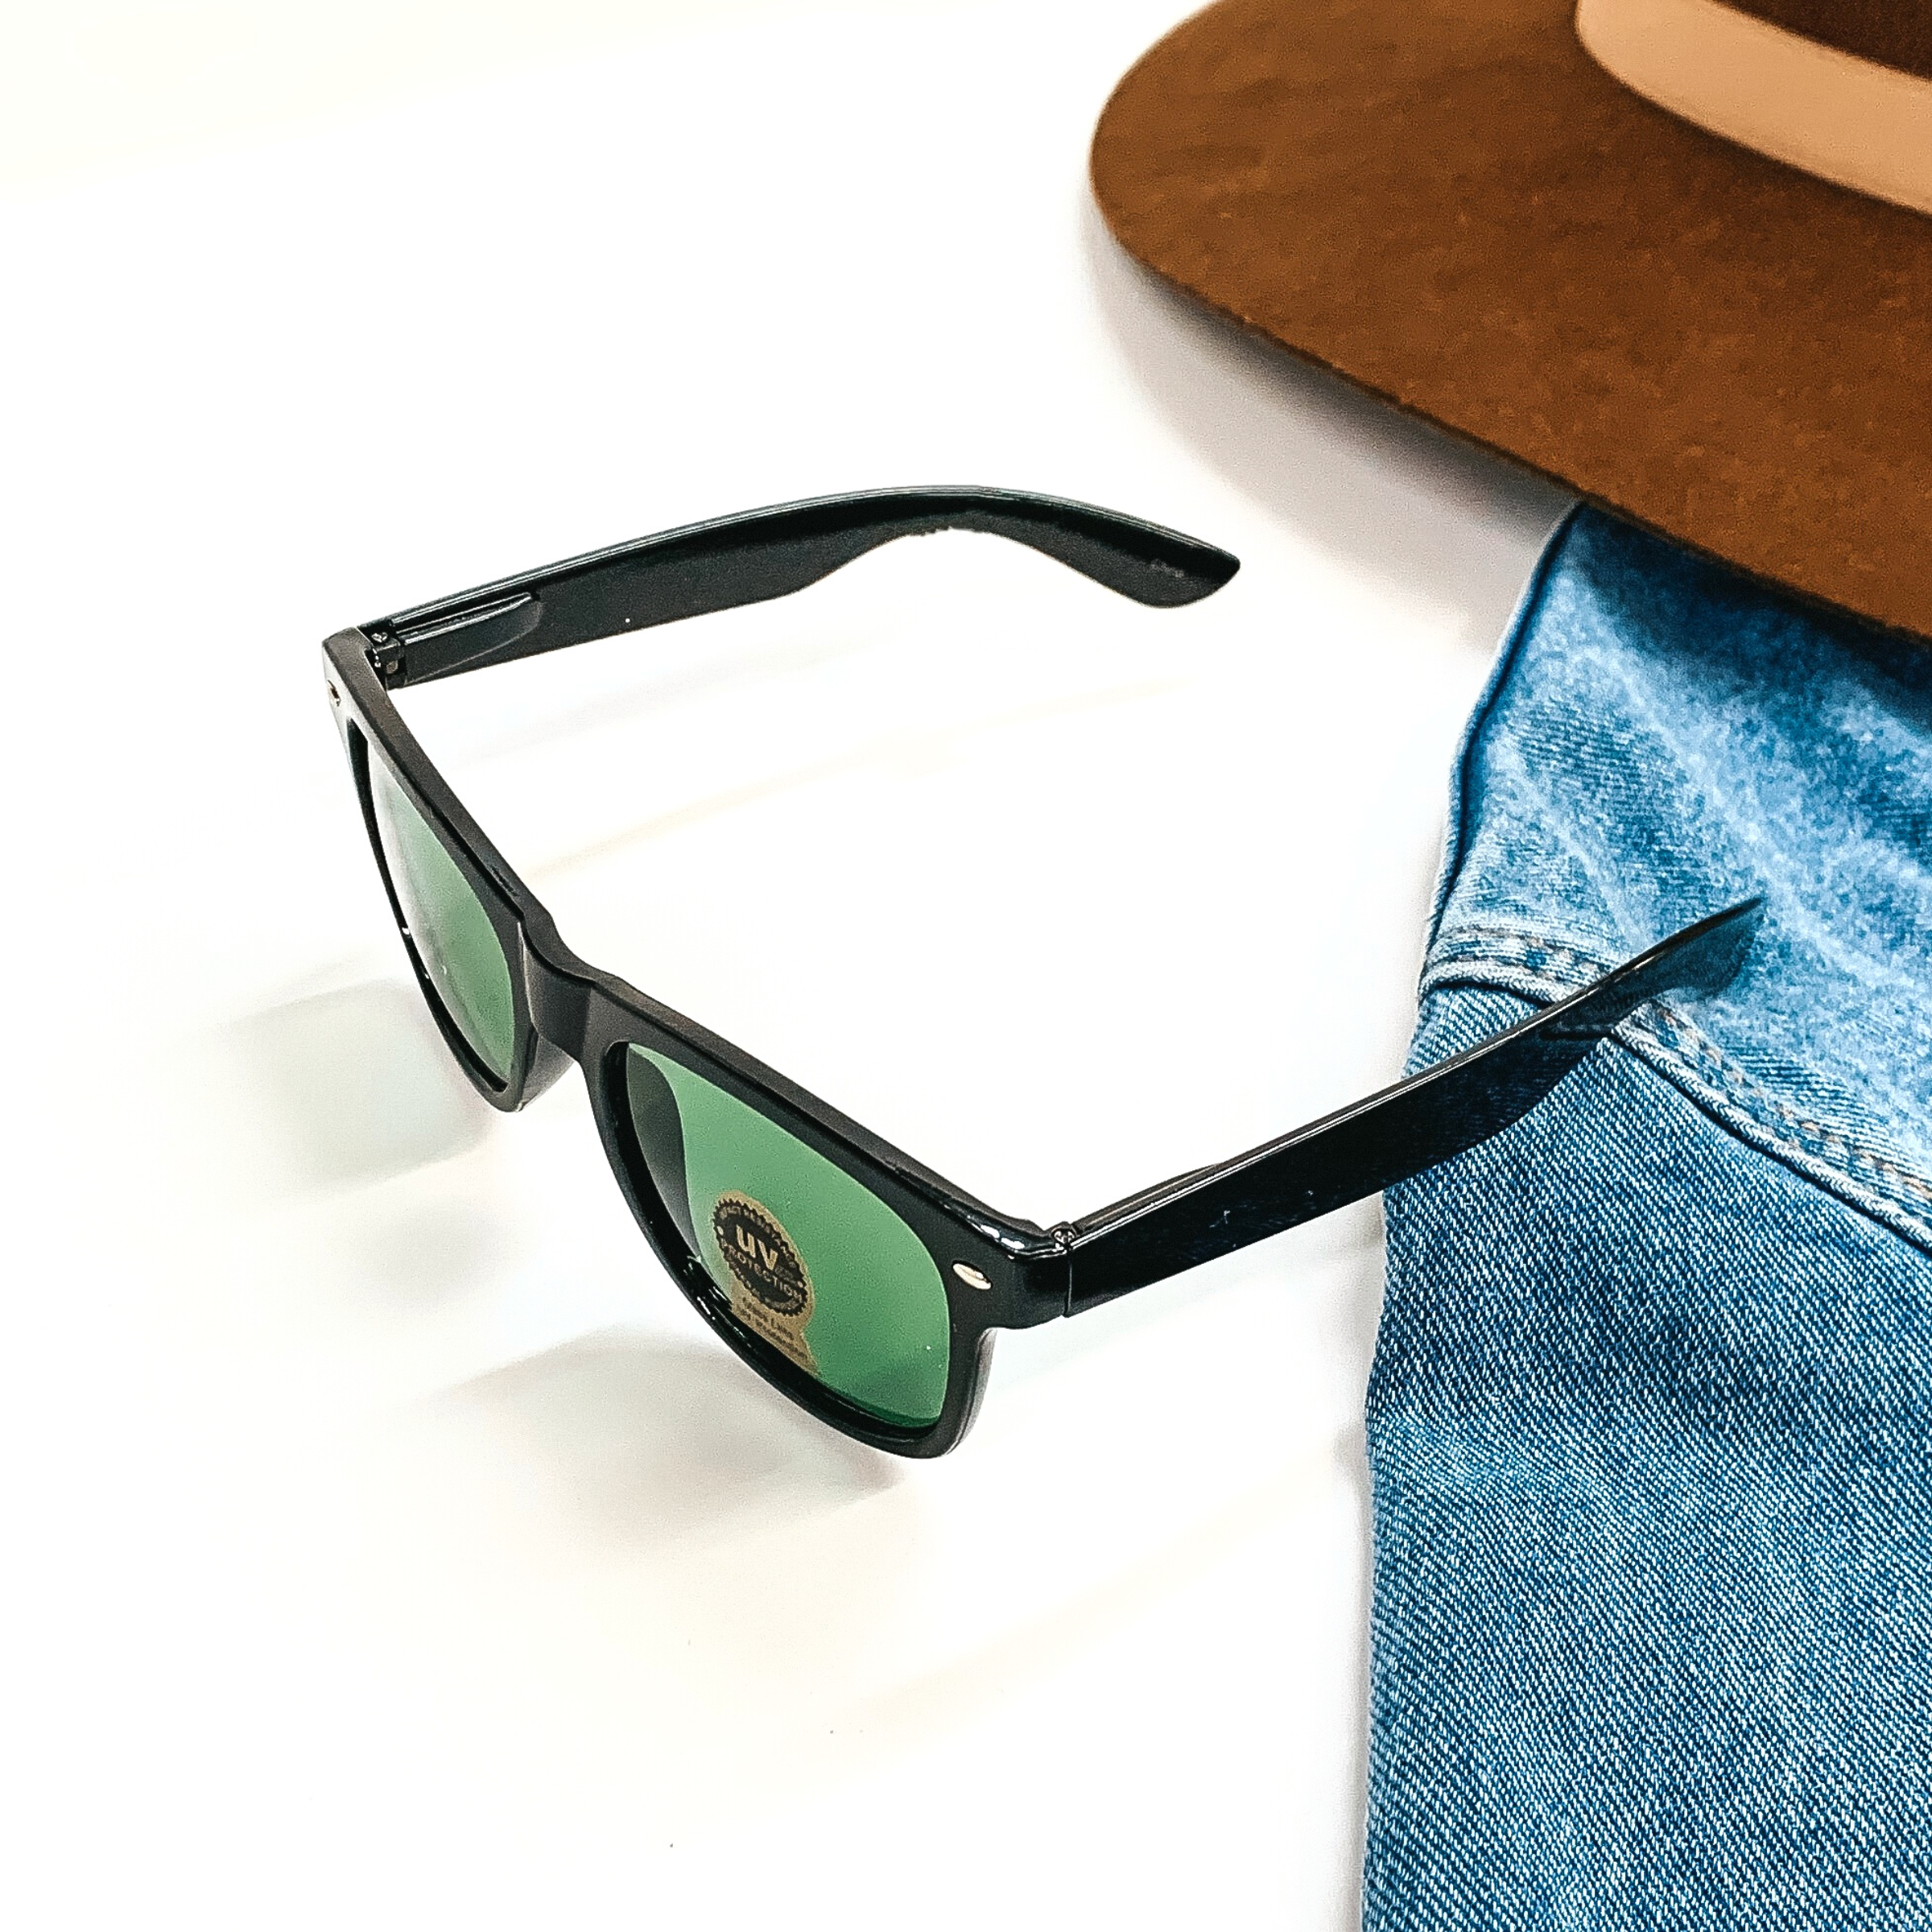 This pair of sunglasses has a black frame with dark green lenses and silver detailing  in the side. This pair of sunglasses are taken on a white background and jean jacket  sleeve with a brown felt hat as decor.